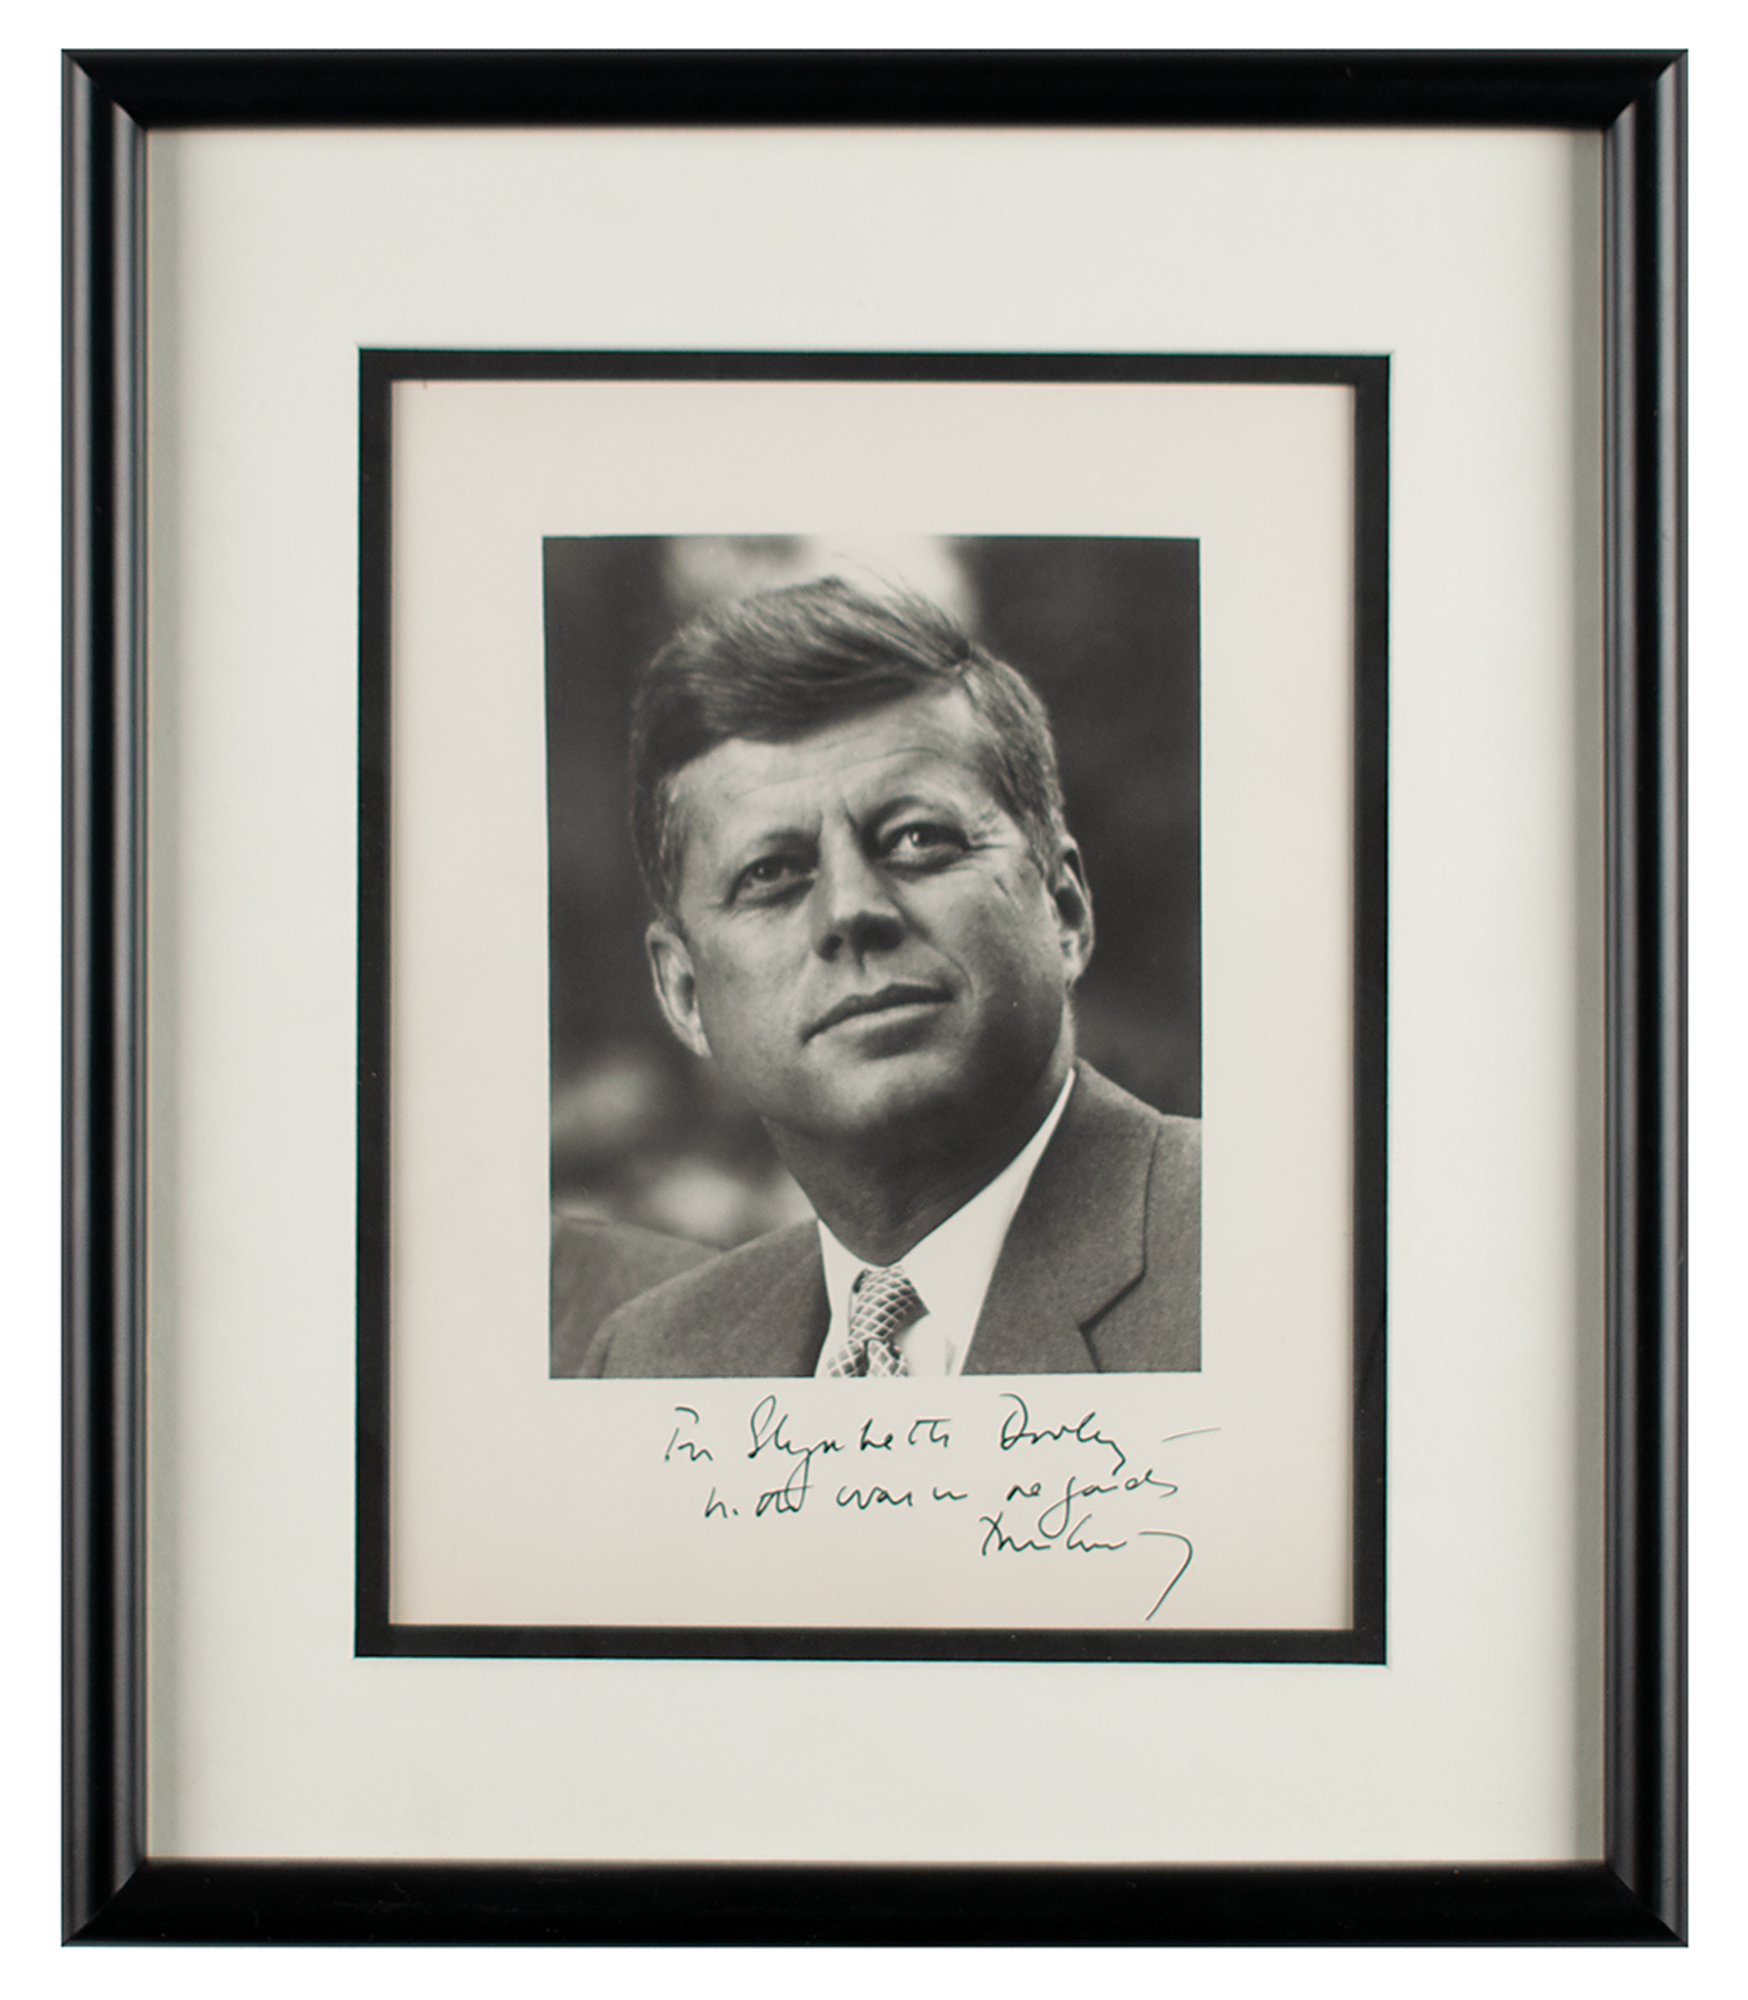 Find Your Favorite Product Cost Less All The Way Lowest Prices Kennedy 8x10 Signed Photo Print 